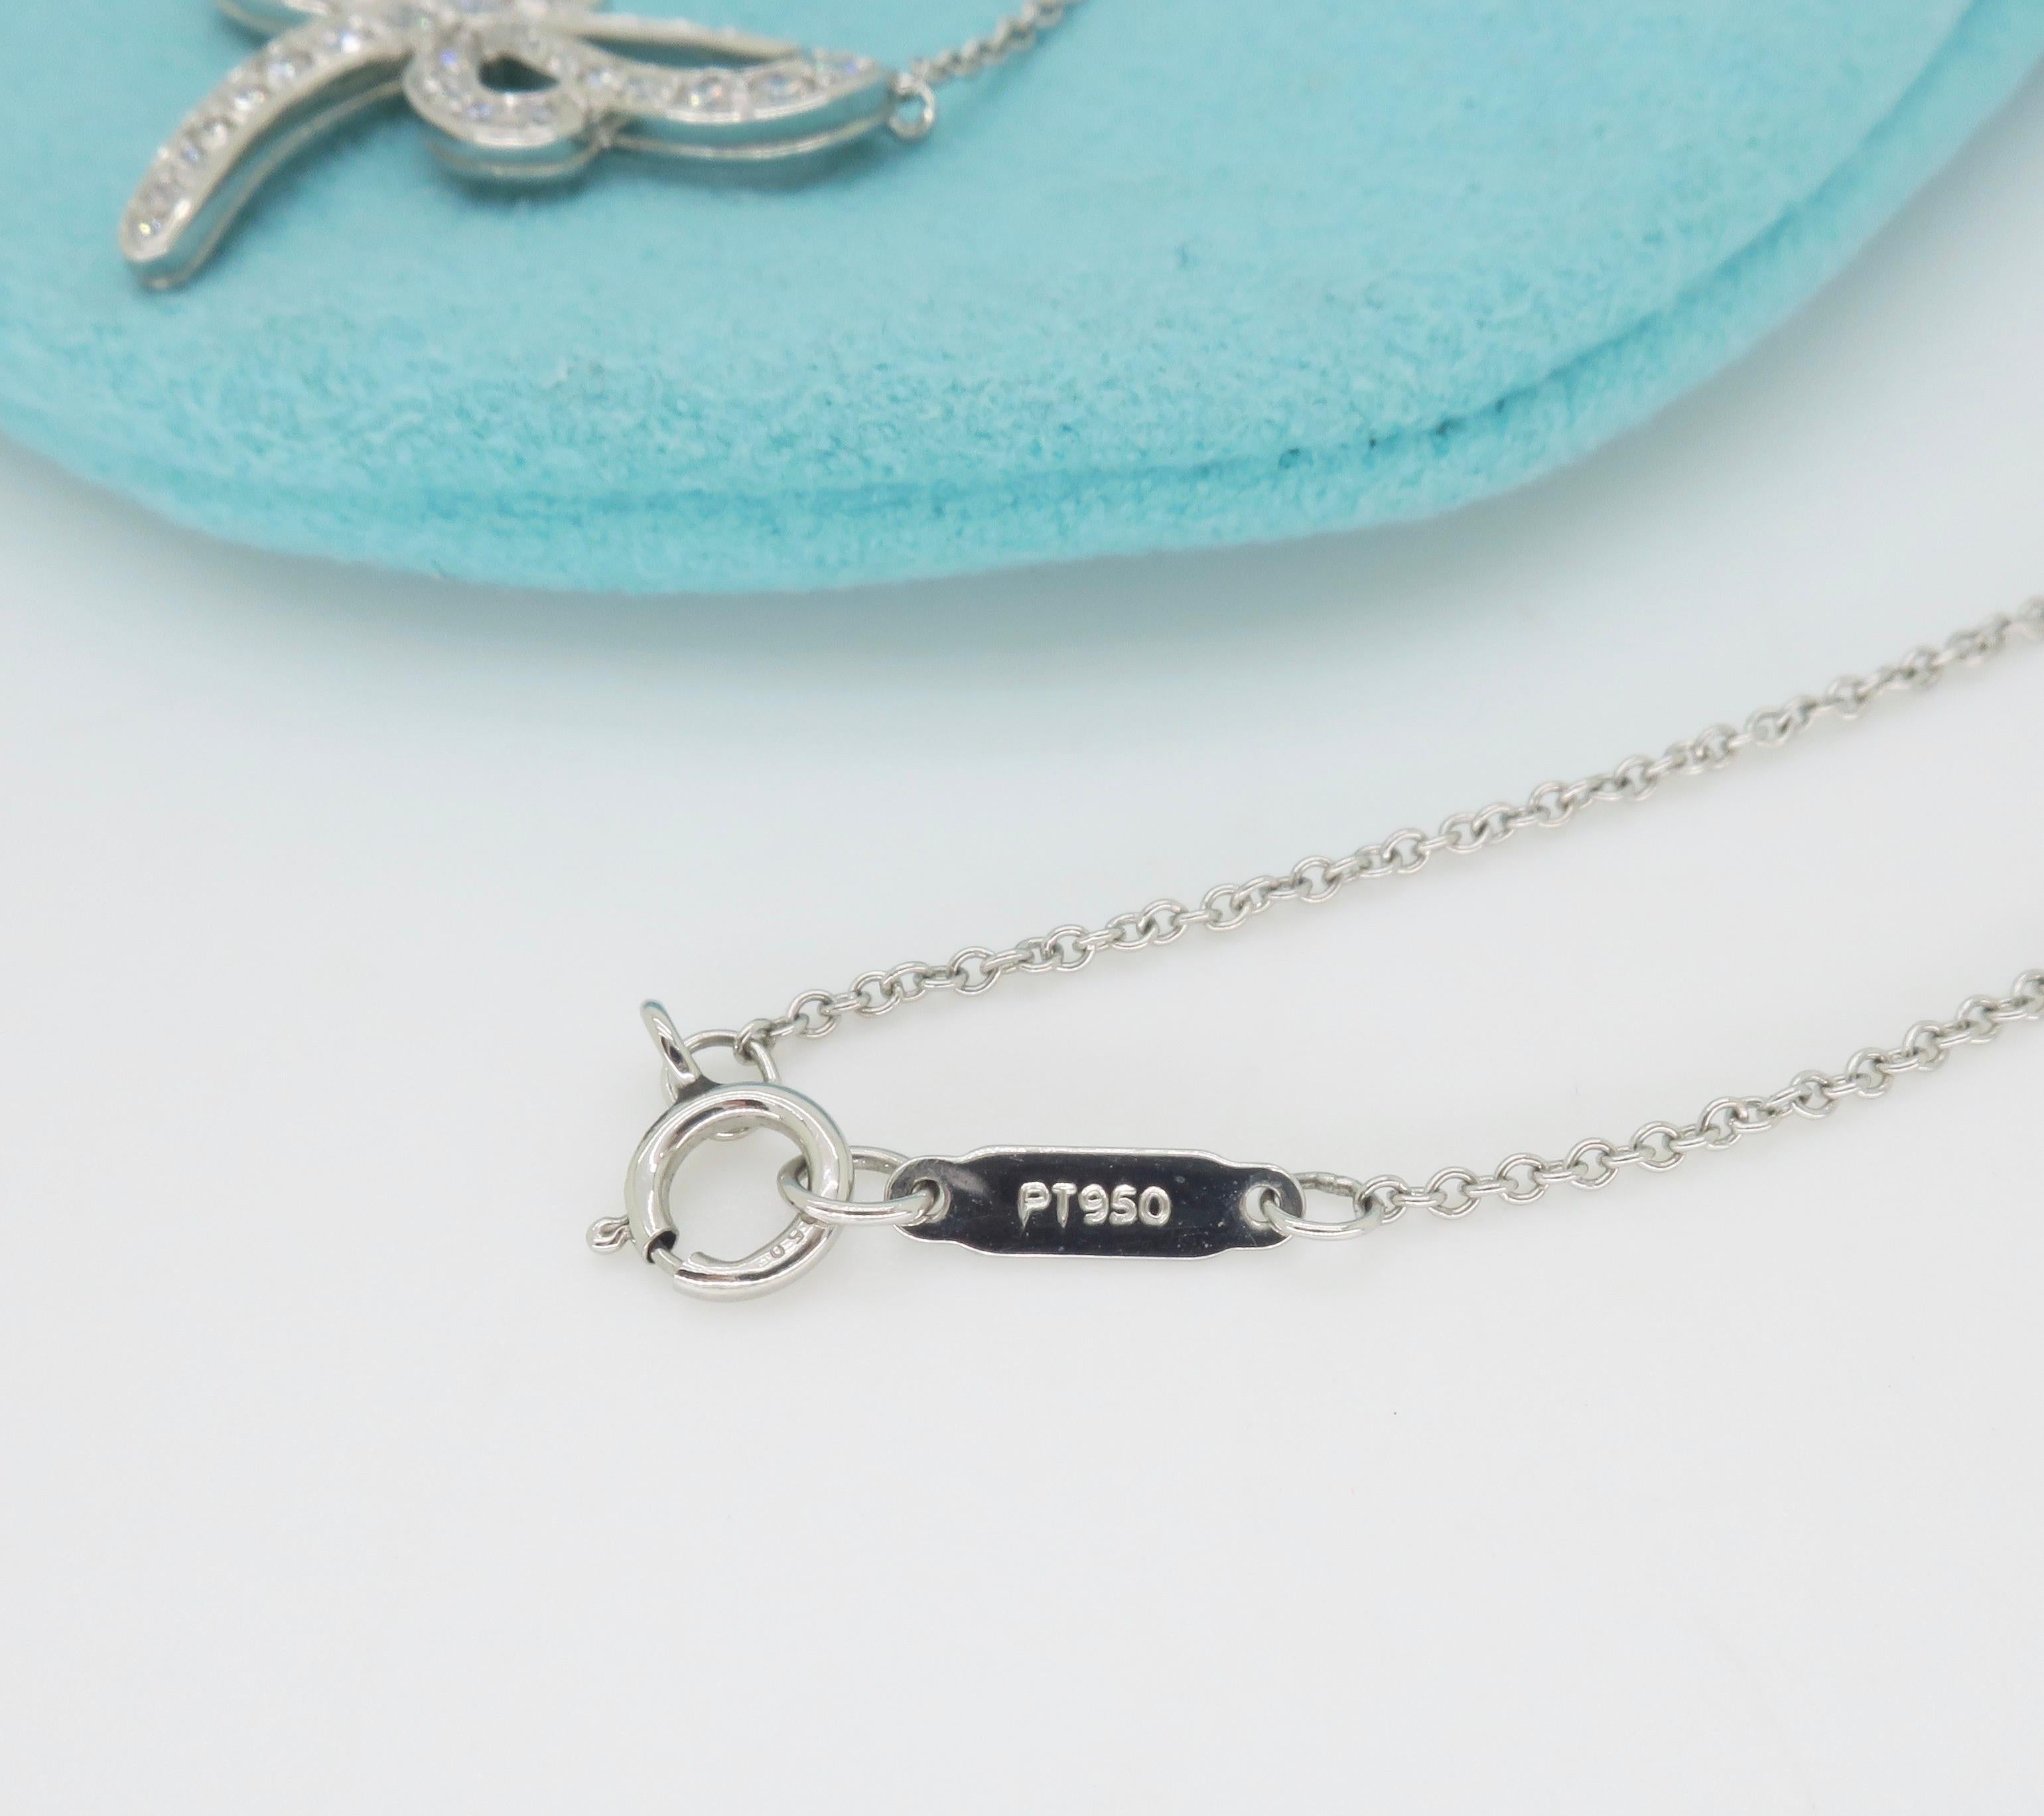 Women's Rare Tiffany & Co. Diamond Dragonfly Necklace made in Platinum 